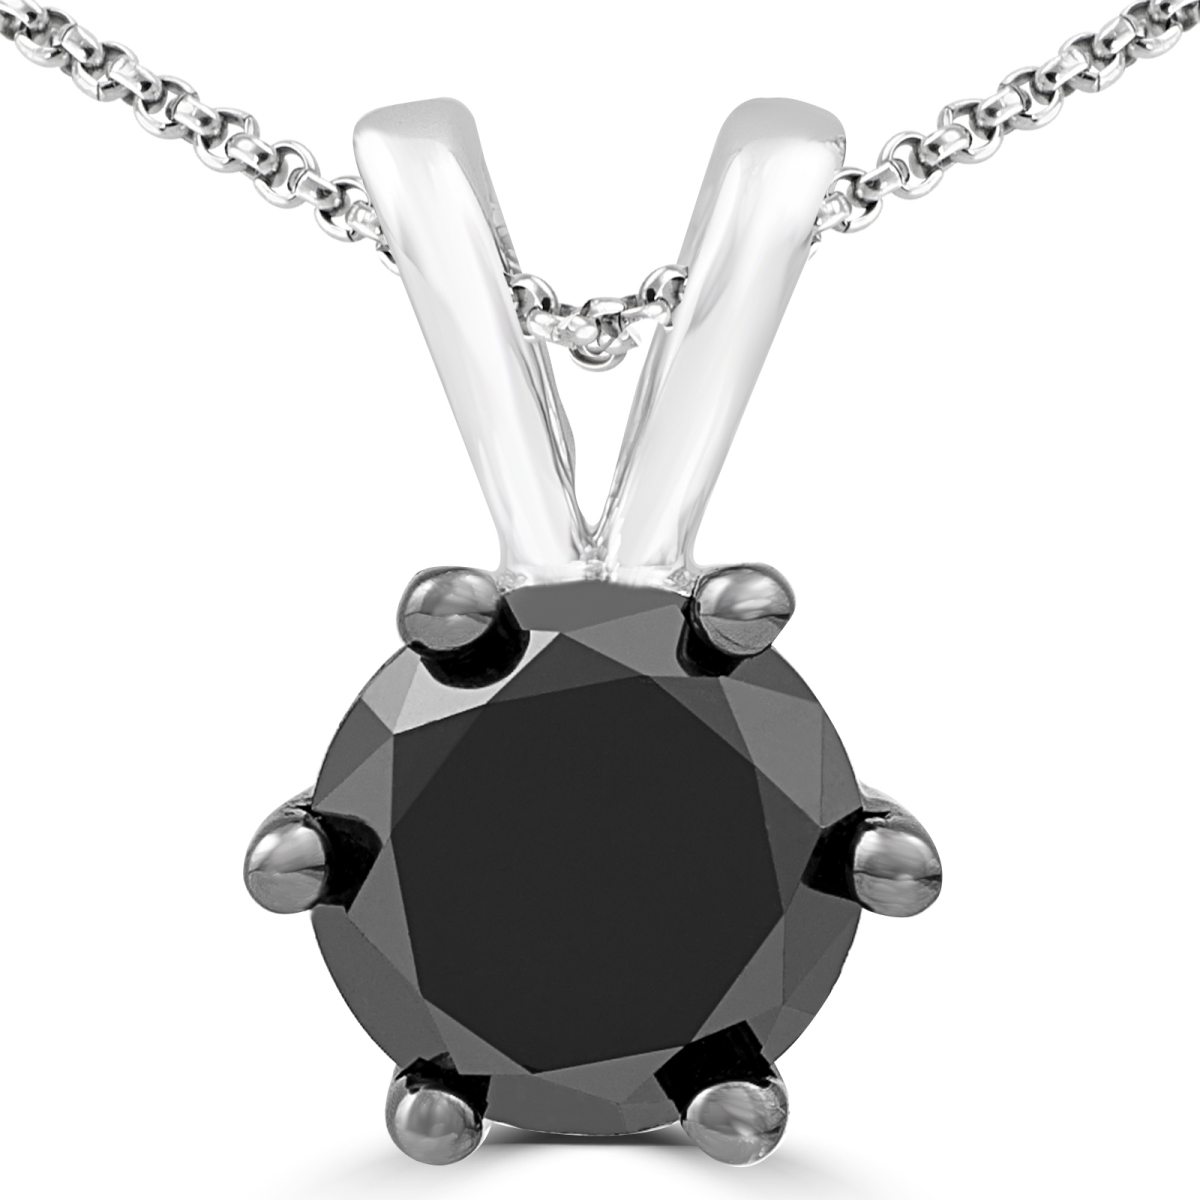 Mdr170036 0.8 Ct Round Black Diamond Solitaire Pendant Necklace In 10k